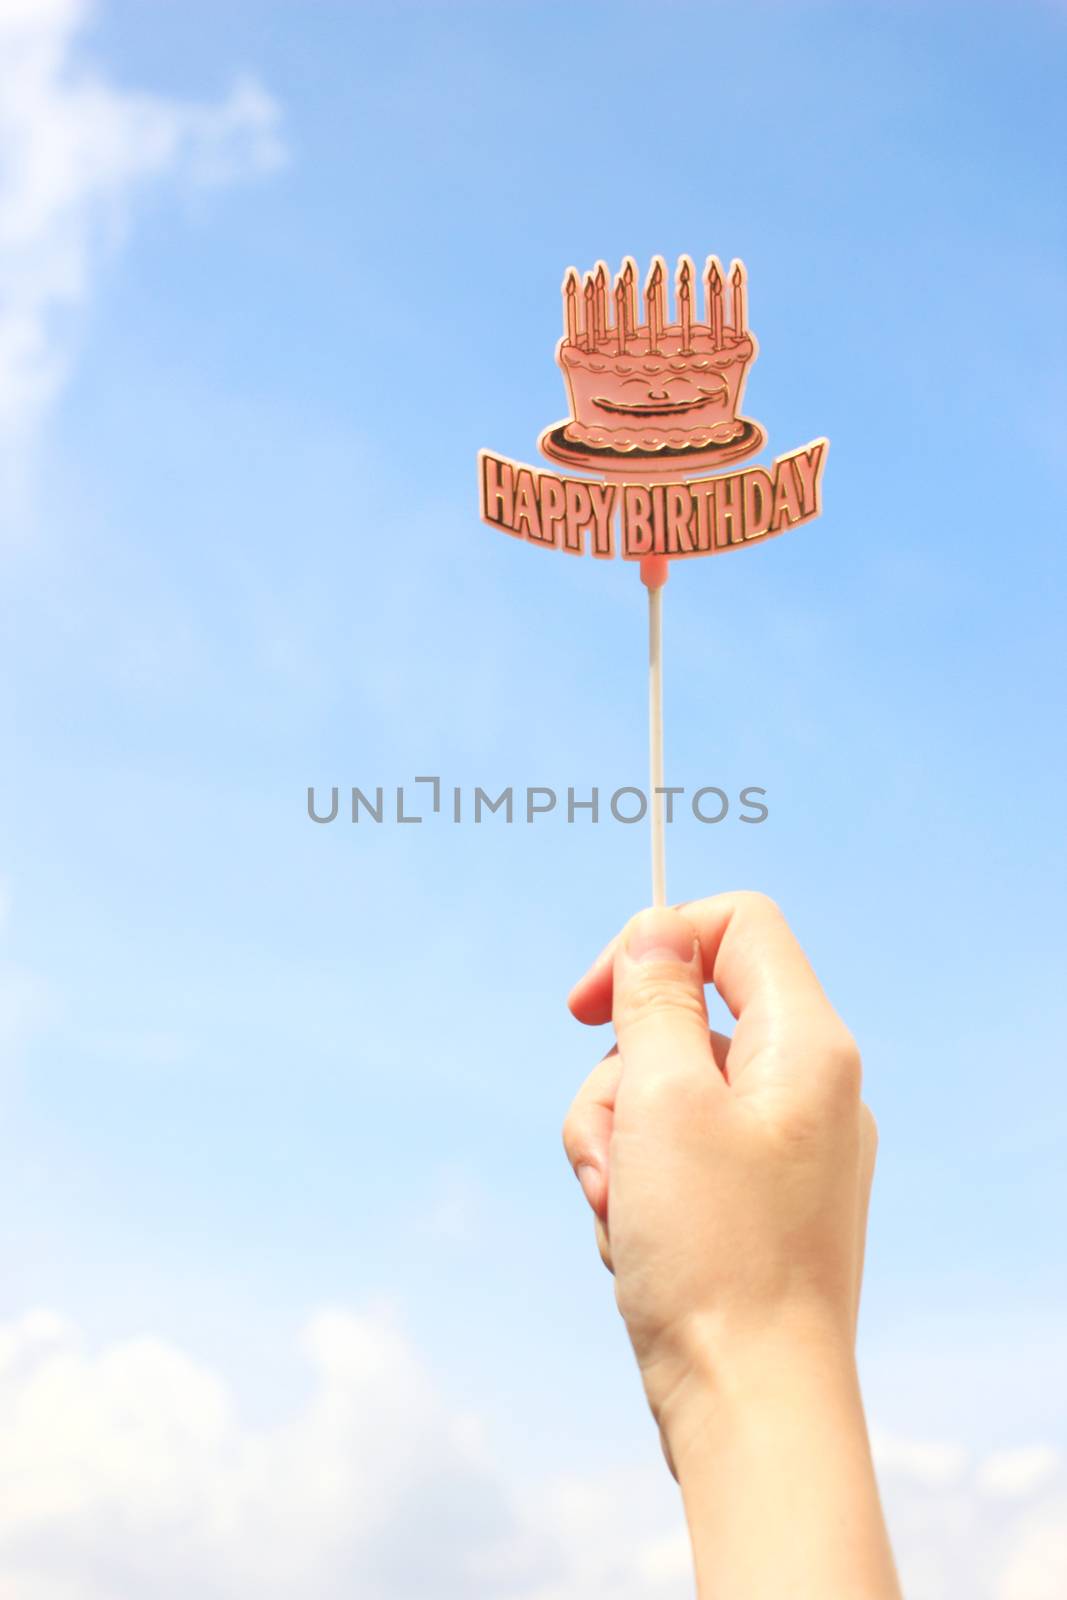 Hand holding happy birthday tag with blue sky by nuchylee